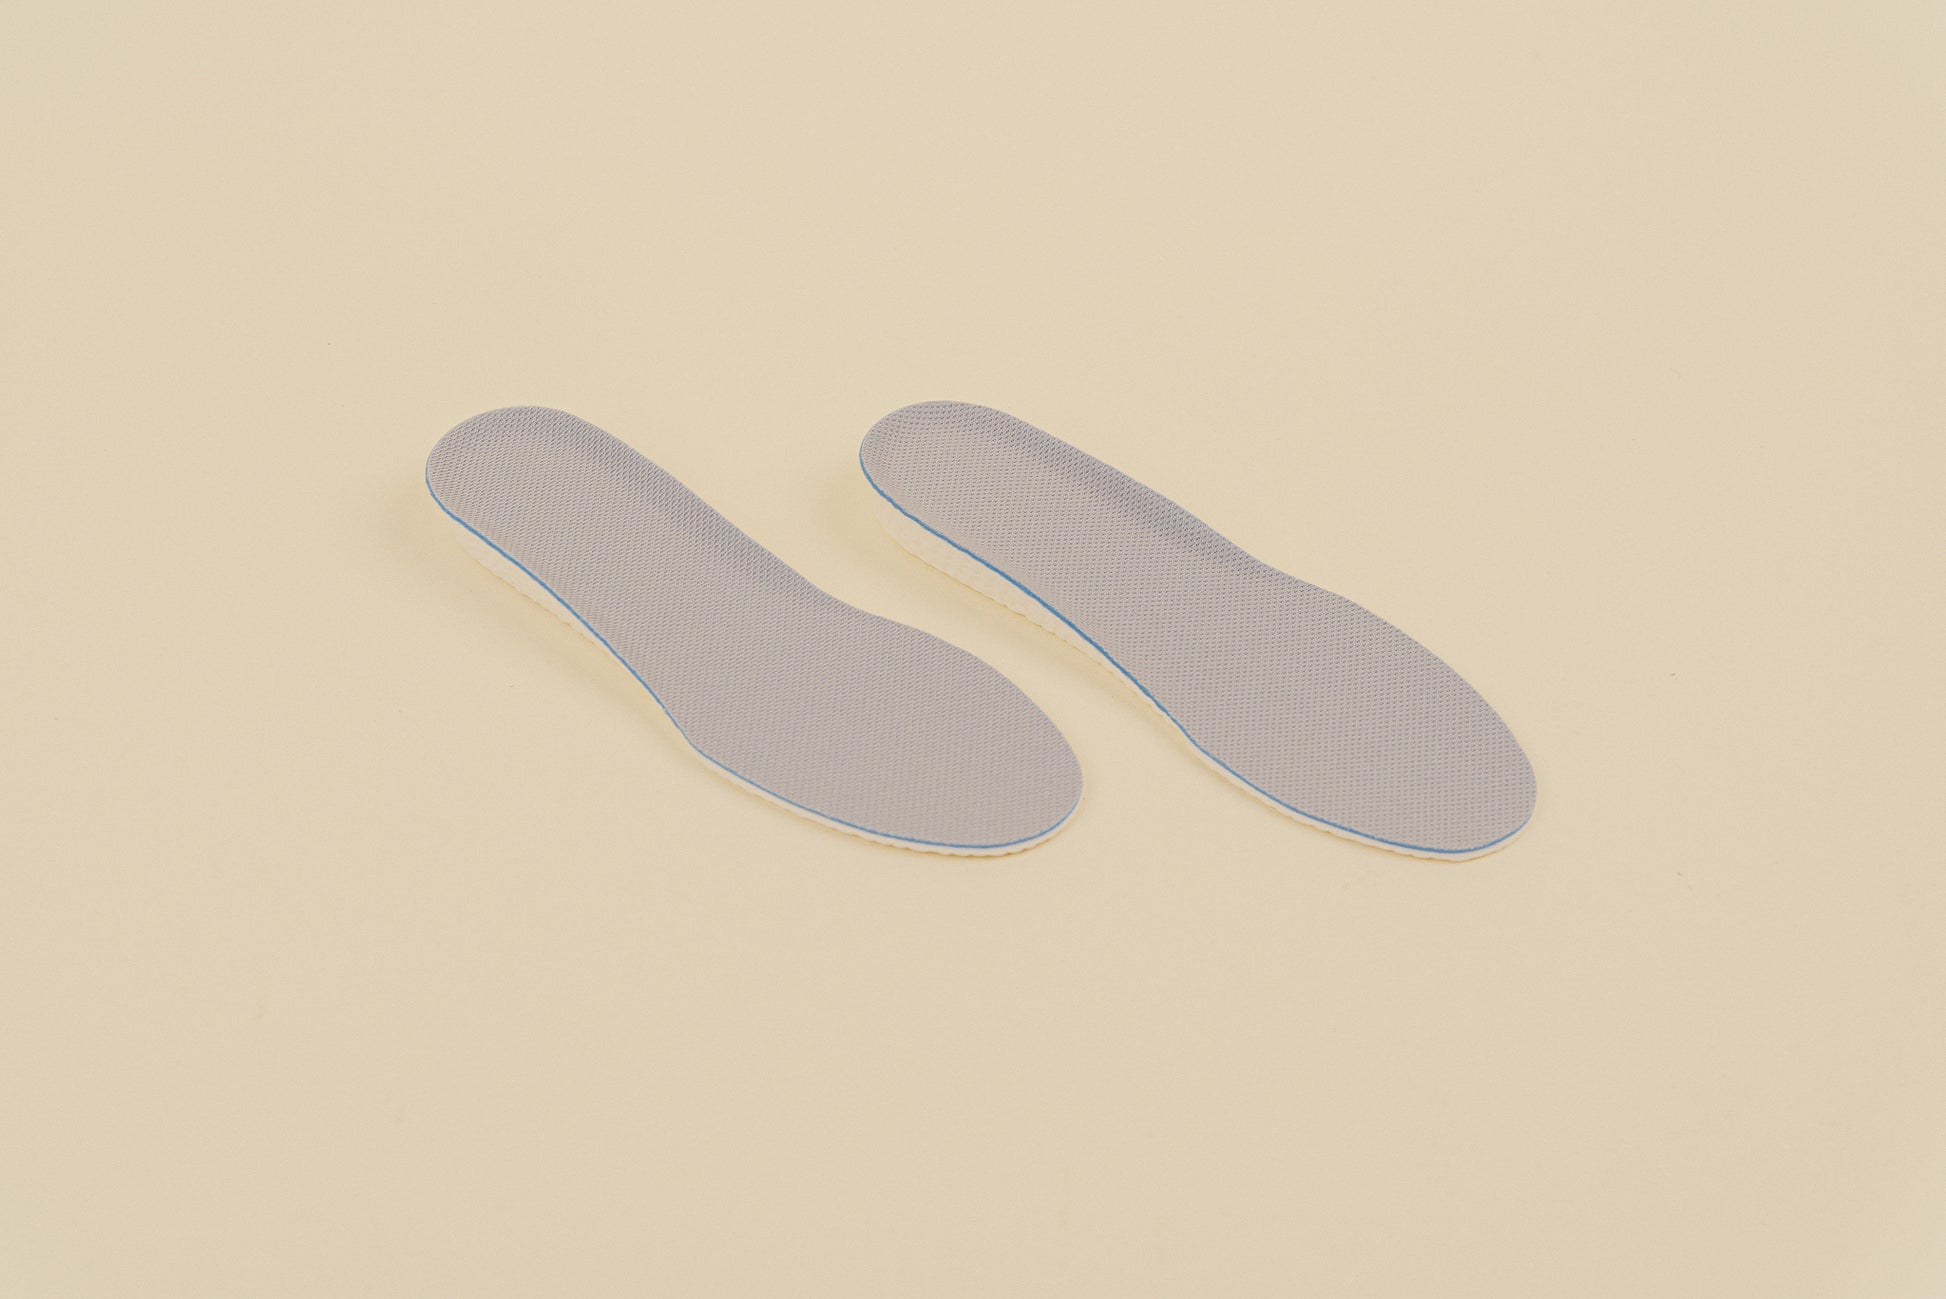 Brillaré foam sneaker insoles for sneakers, shoes, and boots. Boost style